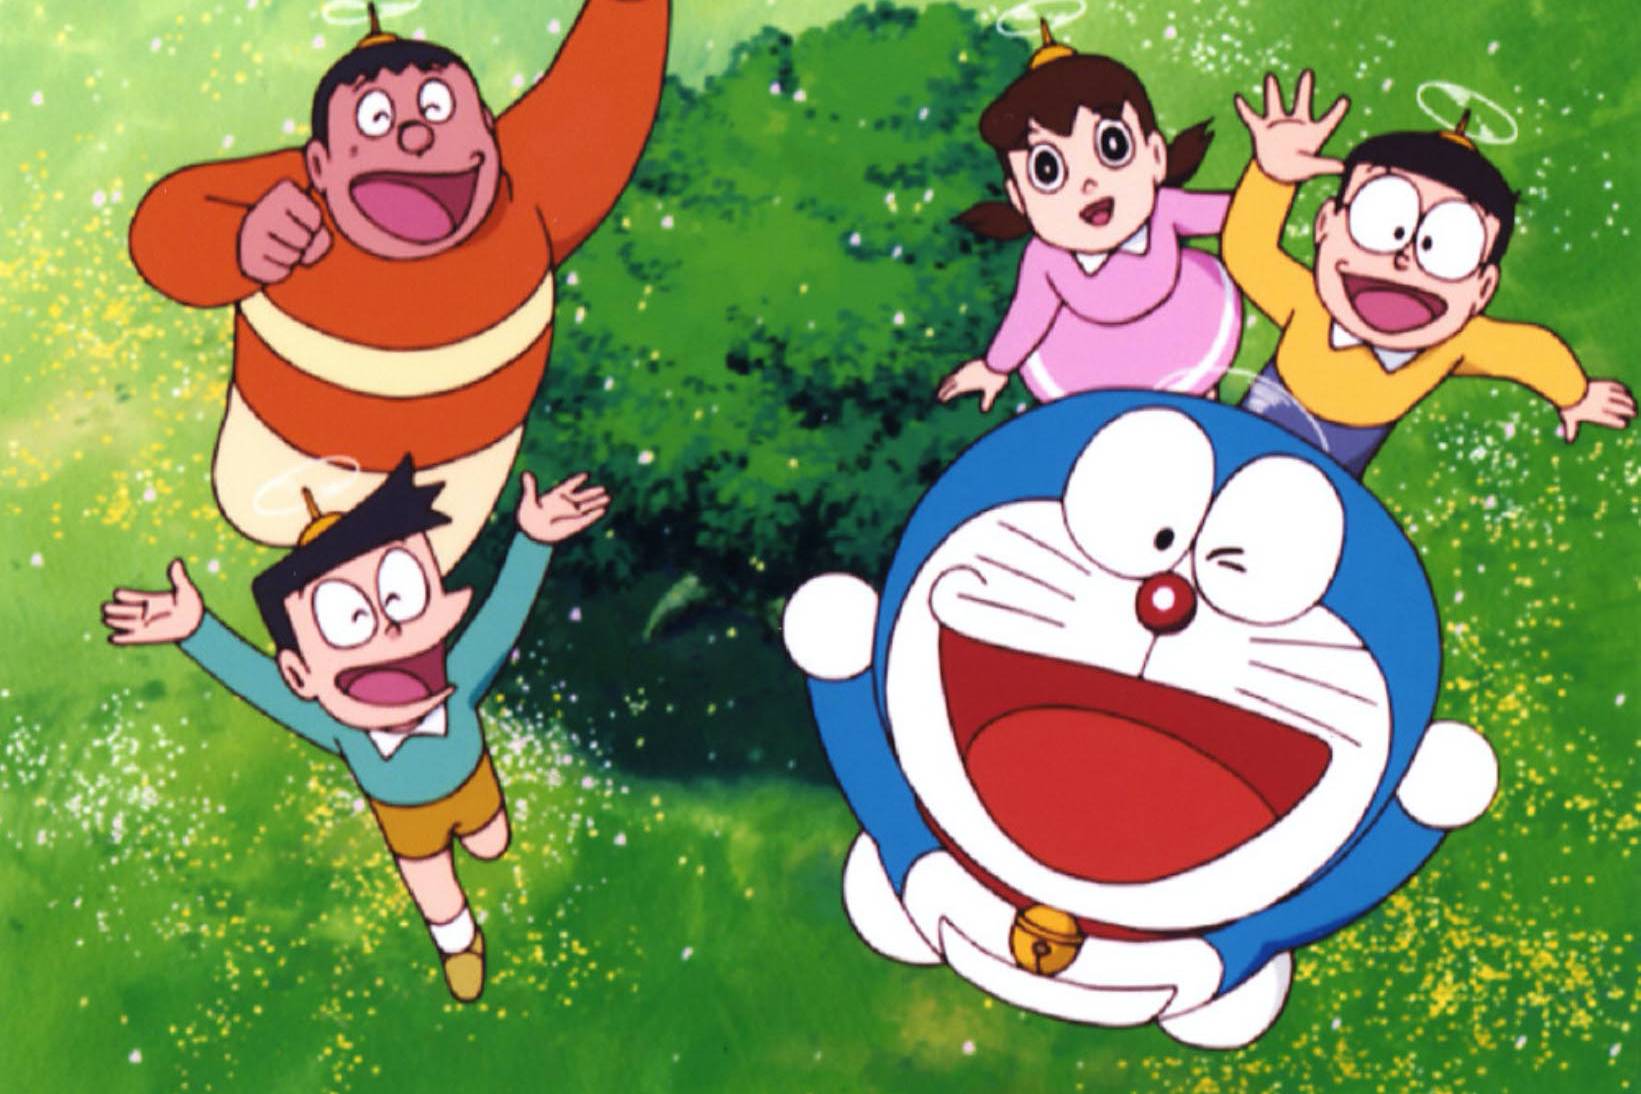 Fifty years of Doraemon, and still there are lessons to be learned ...